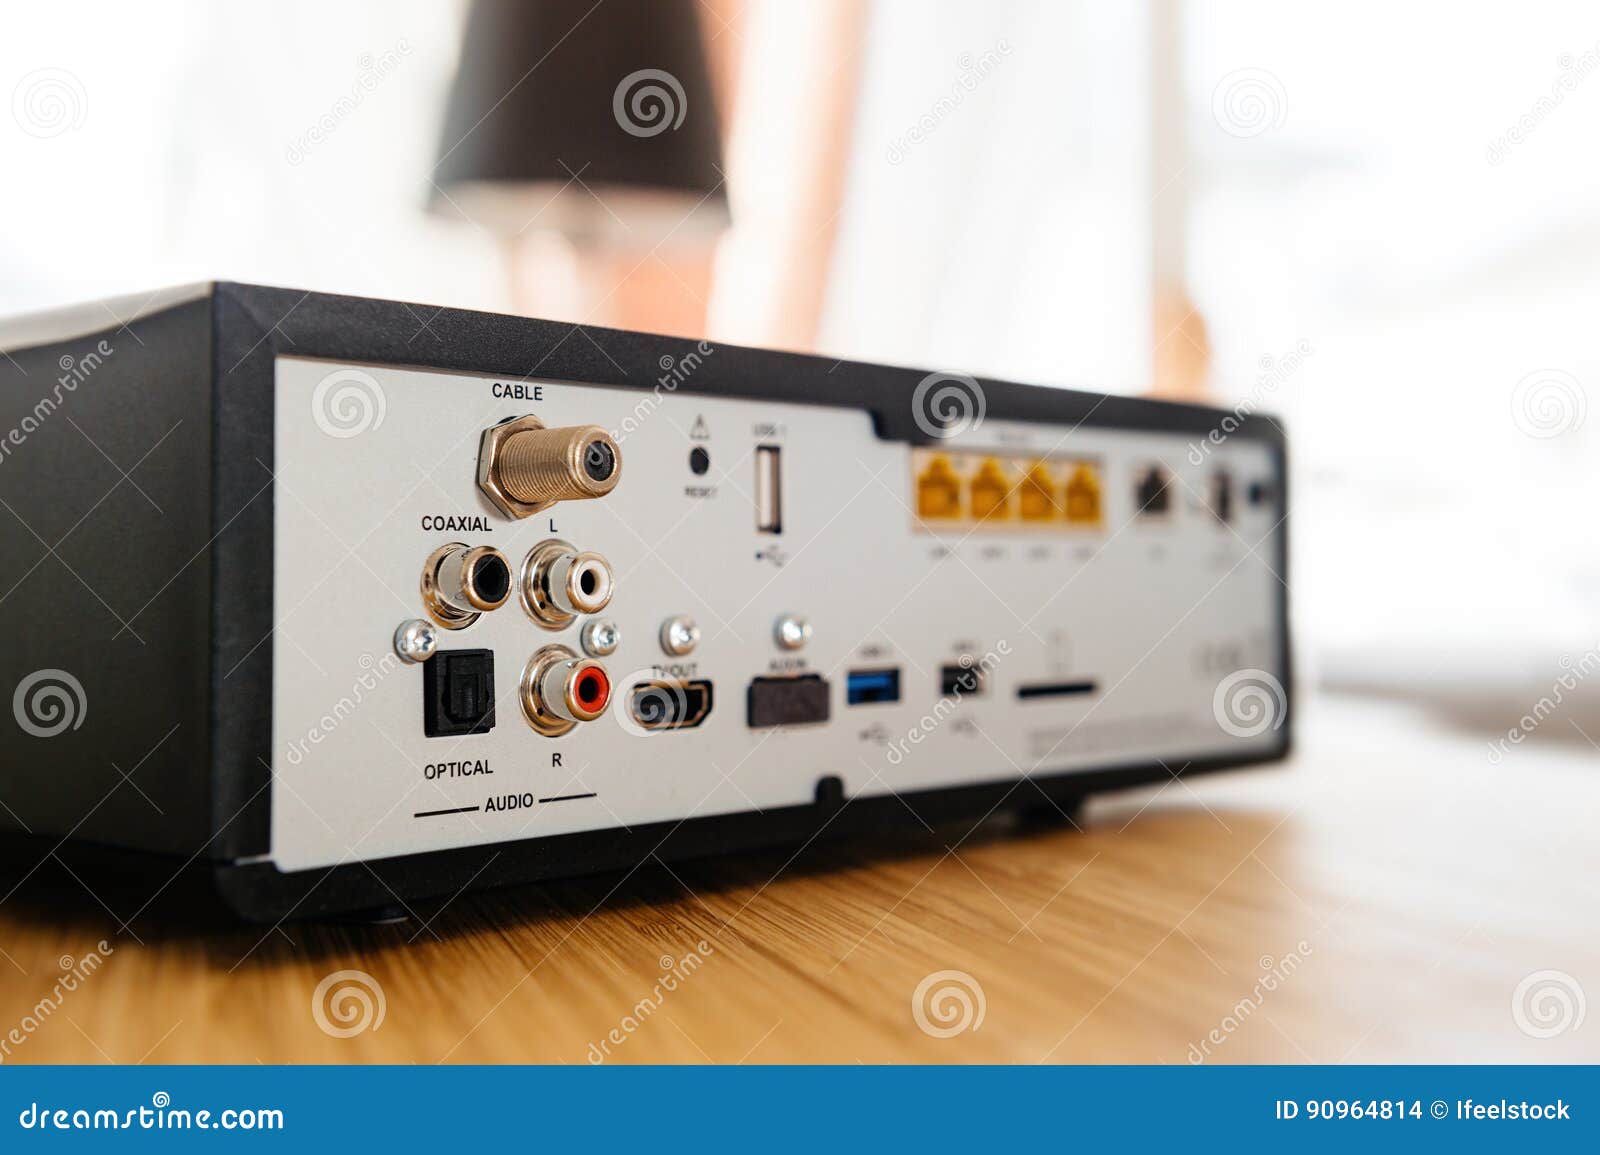 Multiple for Connection Behind Tv Box Stock Photo - Image of digital, adsl: 90964814